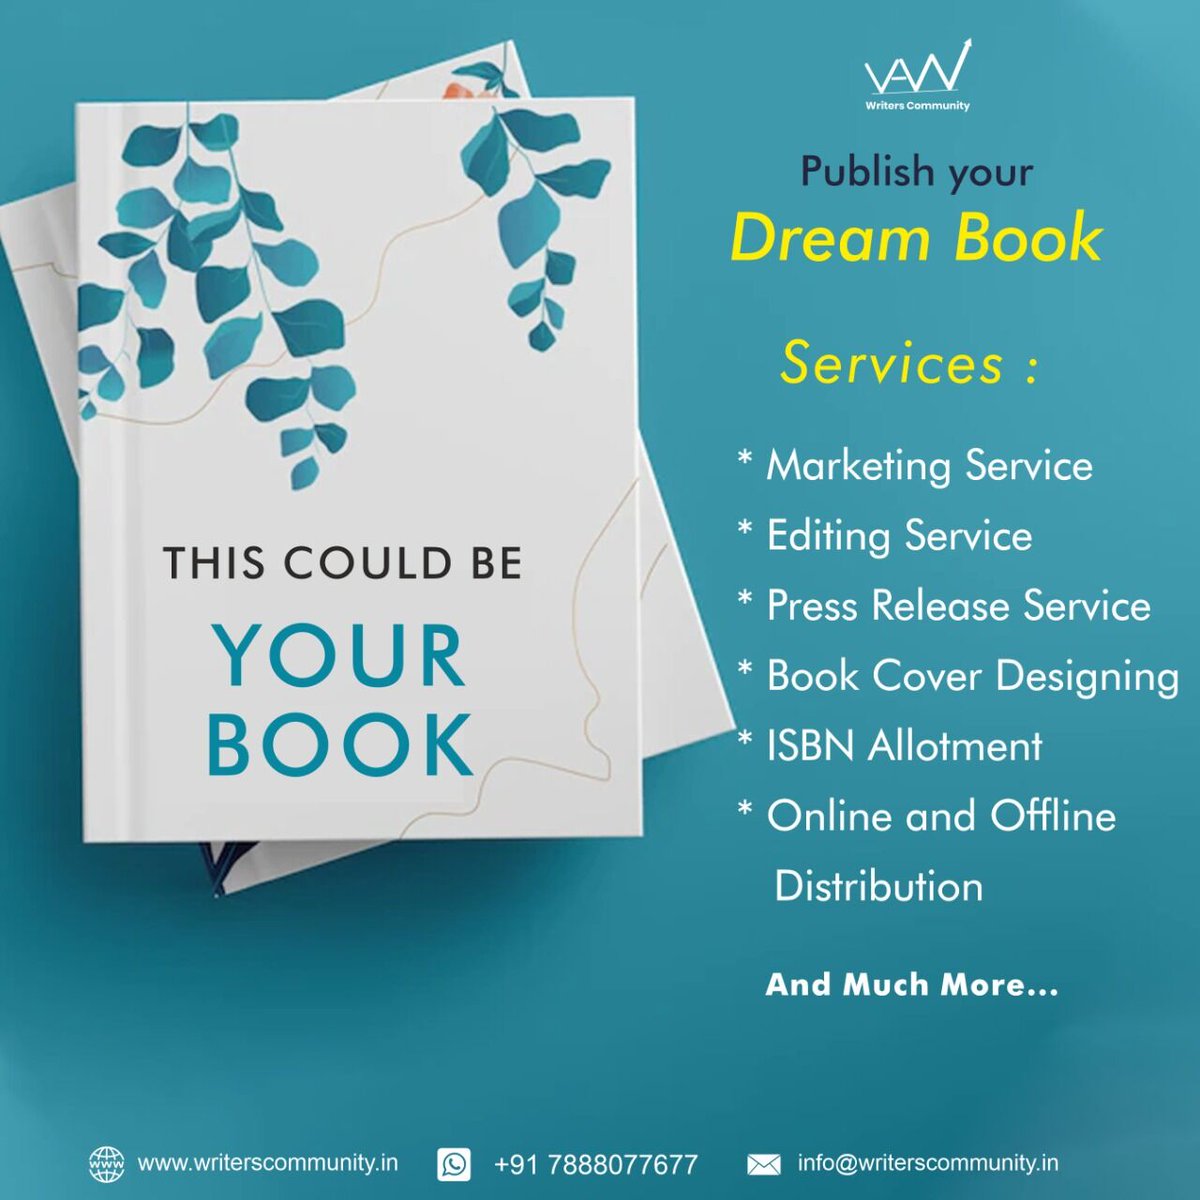 'Publish your Dream Book with this Services: ＊ Marketing Service ＊ Editing Service ＊ Press Release Service ＊ Book Cover Designing ＊ ISBN Allotment ＊Online and Offline Distribution' Publish your Book with writerscommunity.in